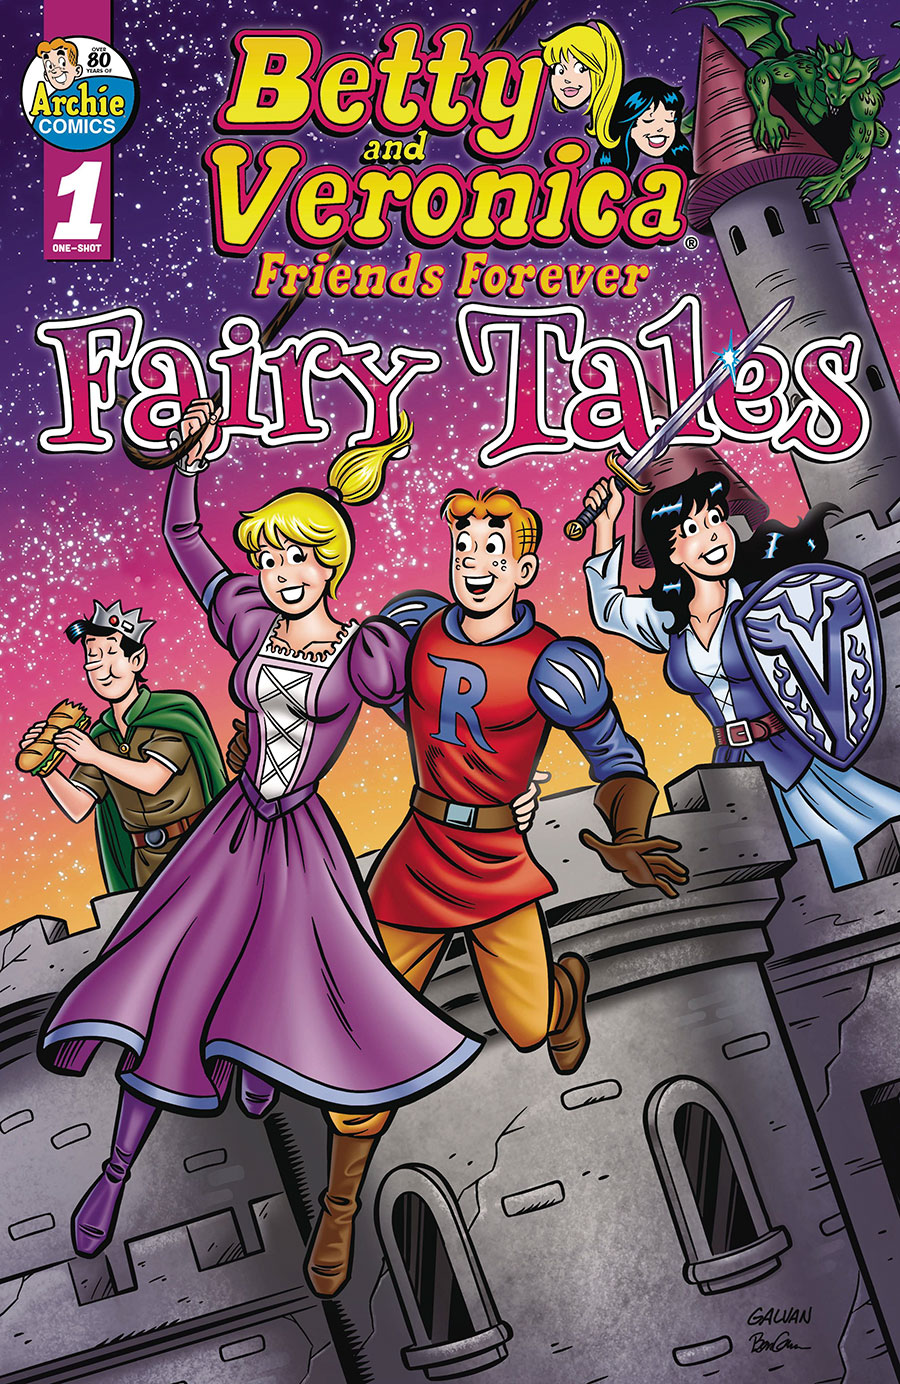 Betty & Veronica Friends Forever Fairy Tales #1 (One Shot)